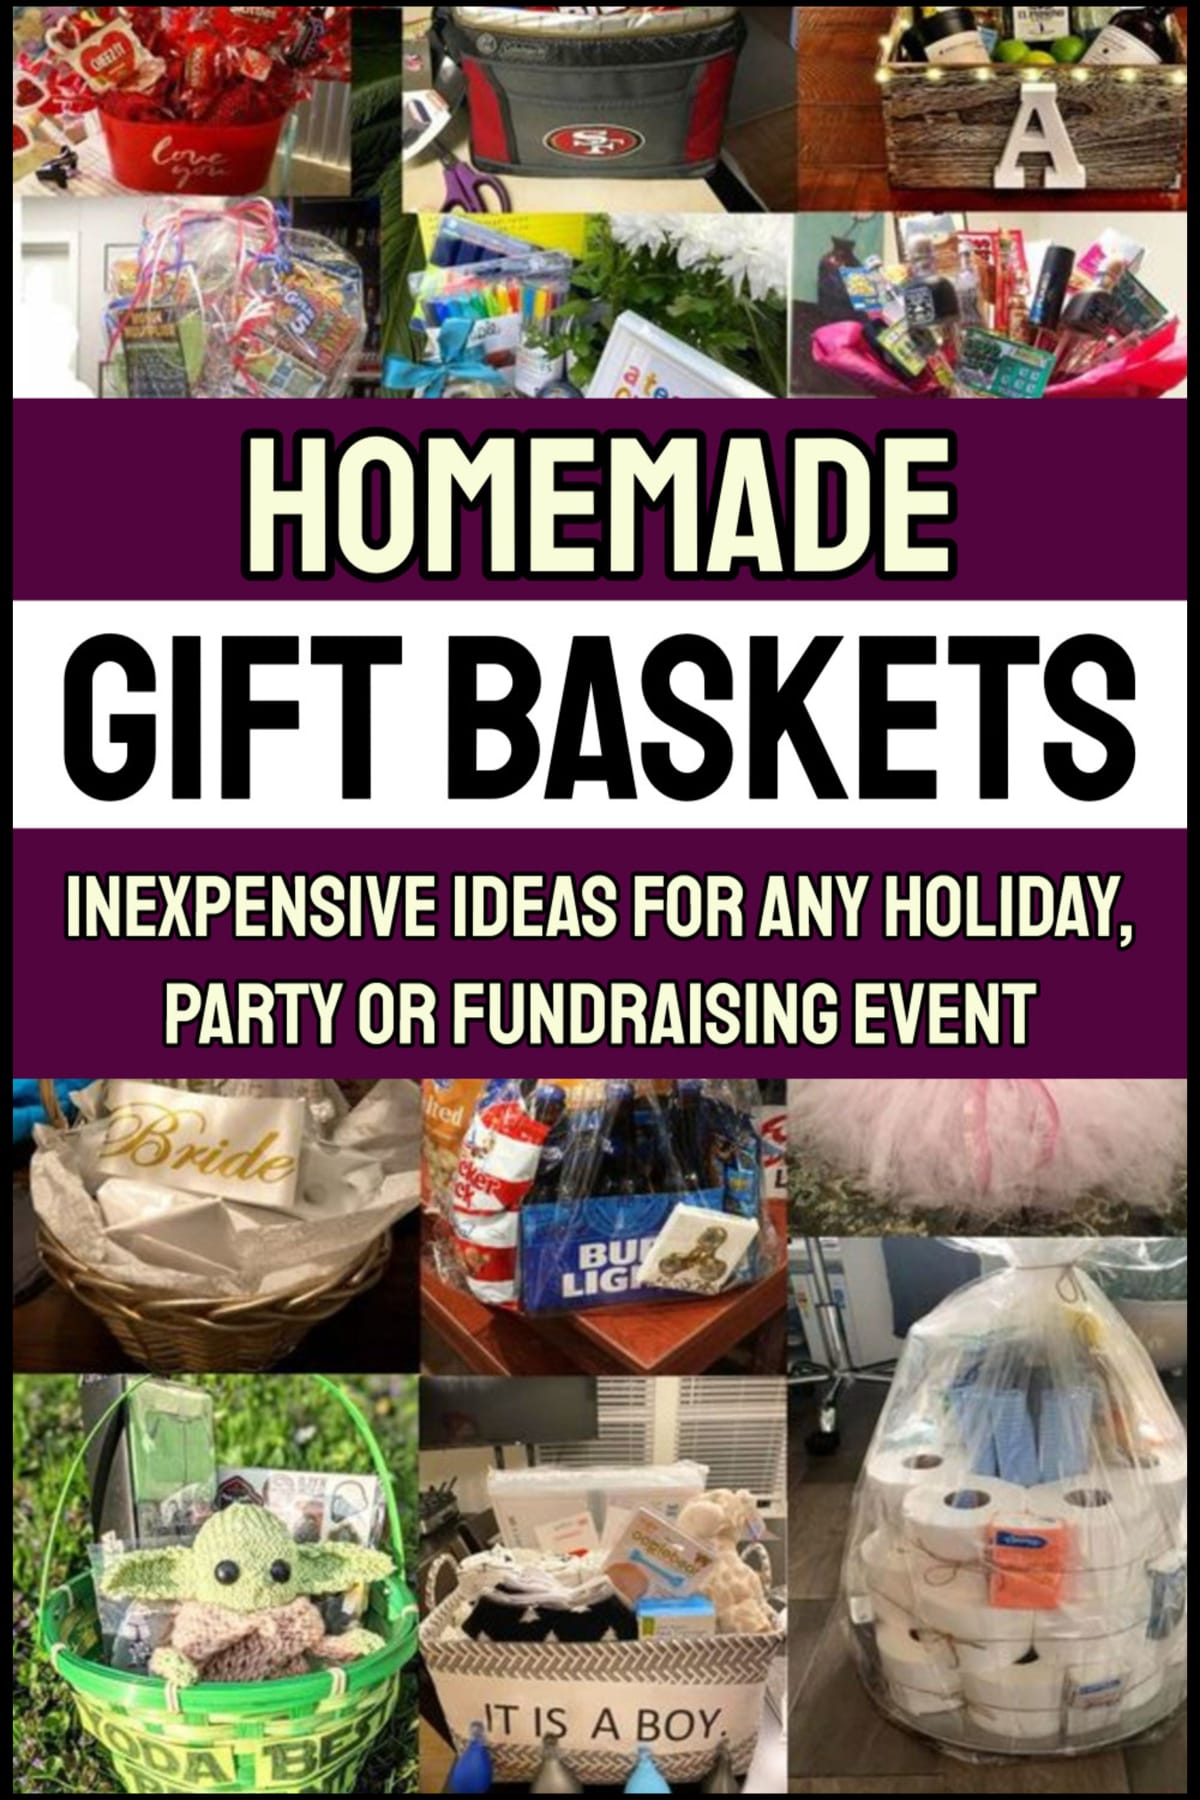 Homemade gift baskets - inexpensive creative gift basket ideas to DIY for birthdays, anniversary, him, her, graduation, Christmas, Valentine's Day, Door Dash gift baskets, Vasectomy care packages, Bunko party favors, raffles, co-workers, teacher appreciation, Orange You Glad themed gift baskets, summer, Aldi gift basket ideas, end of school year student gifts, Star Wars lovers, candy puns, lottery tickets, sympathy baskets and MUCH more.